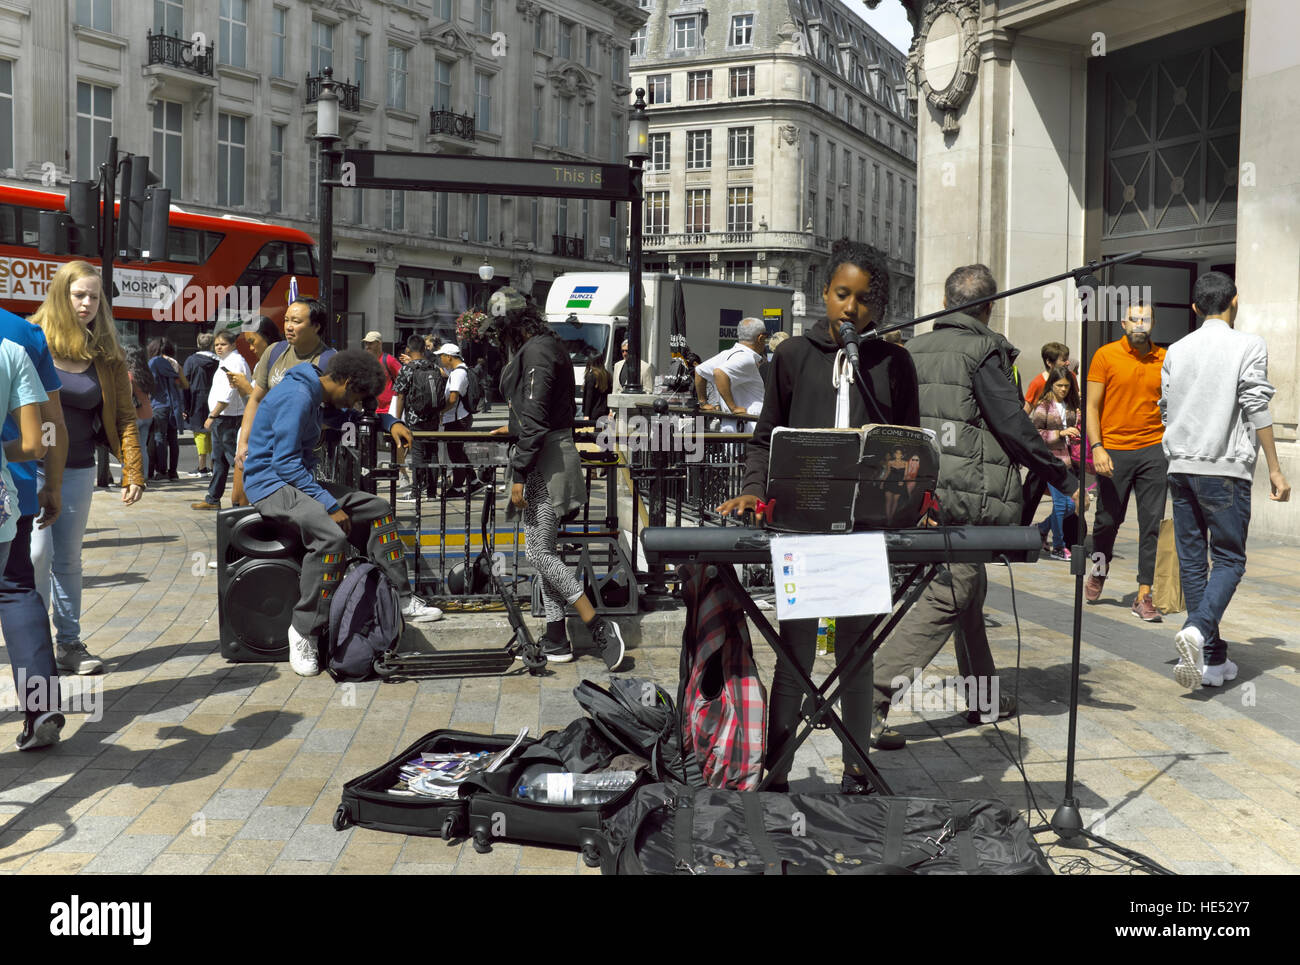 A solo woman busker on a busy street corner in London, England singing for tips. Stock Photo